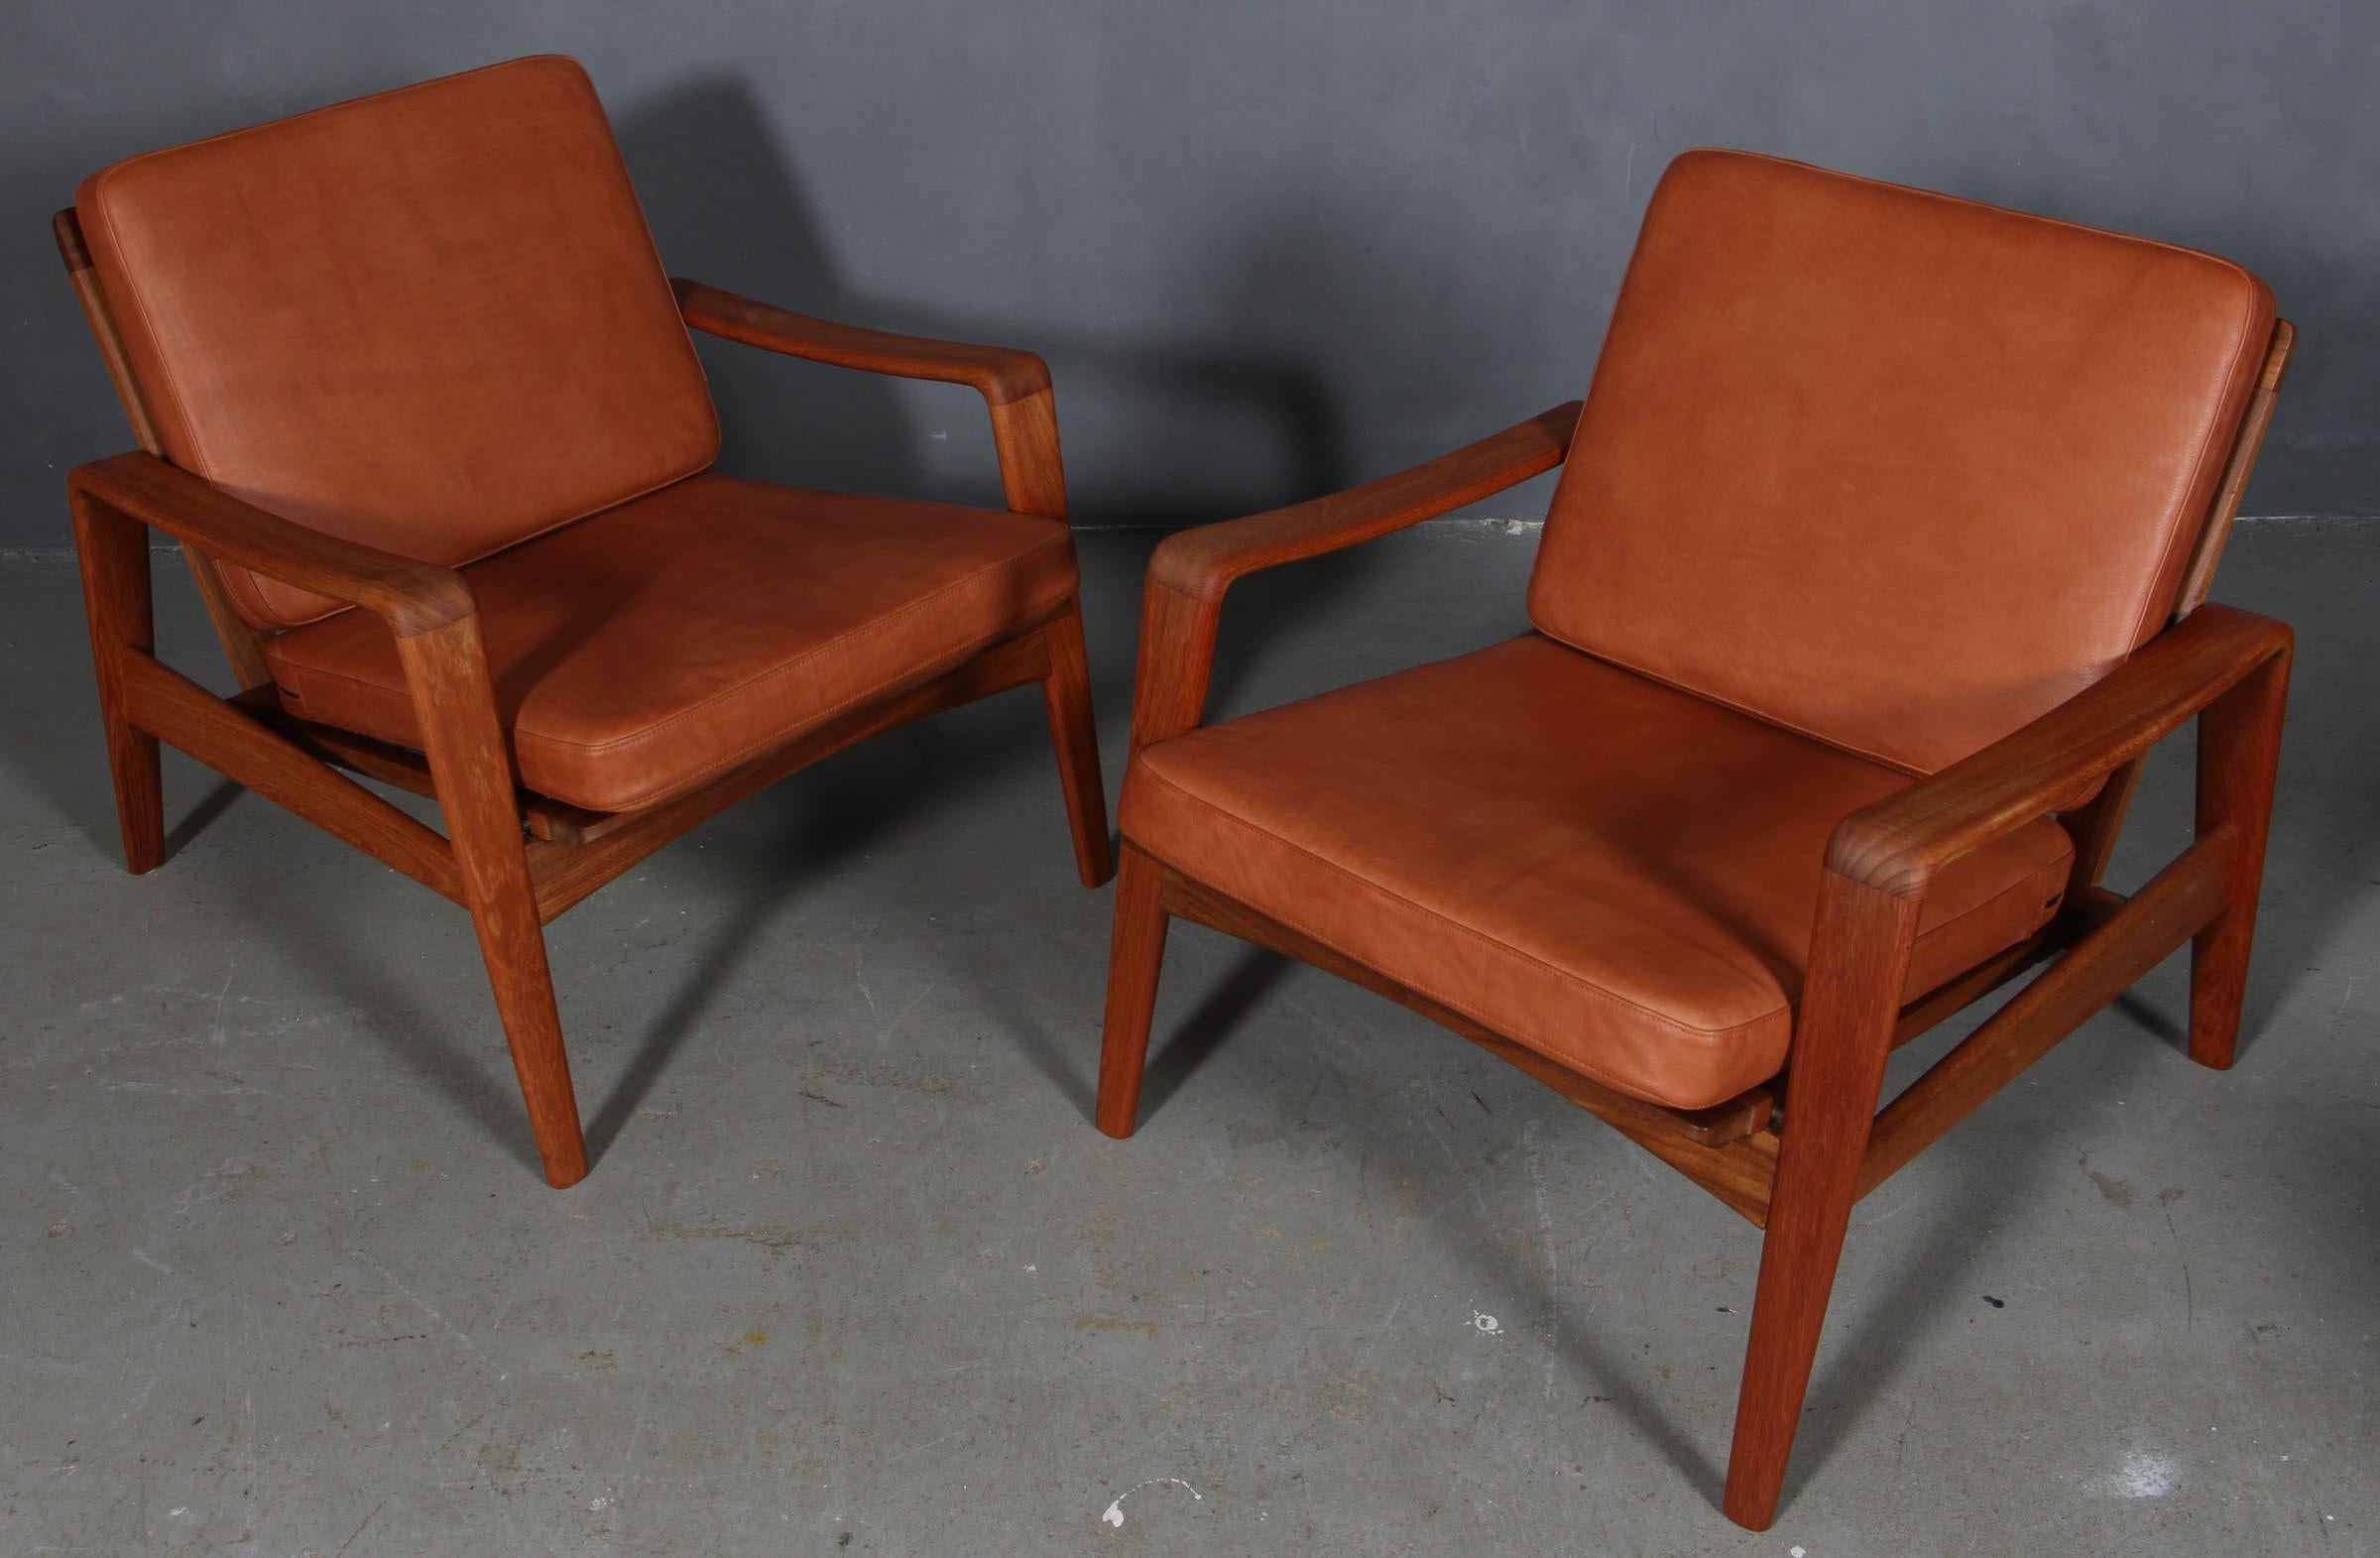 Arne Wahl Iversen. Set of lounge chairs with frame of teak, Loose cushions new upholstered with walnut aniline leather, 1960s. Manufactured by Komfort.

